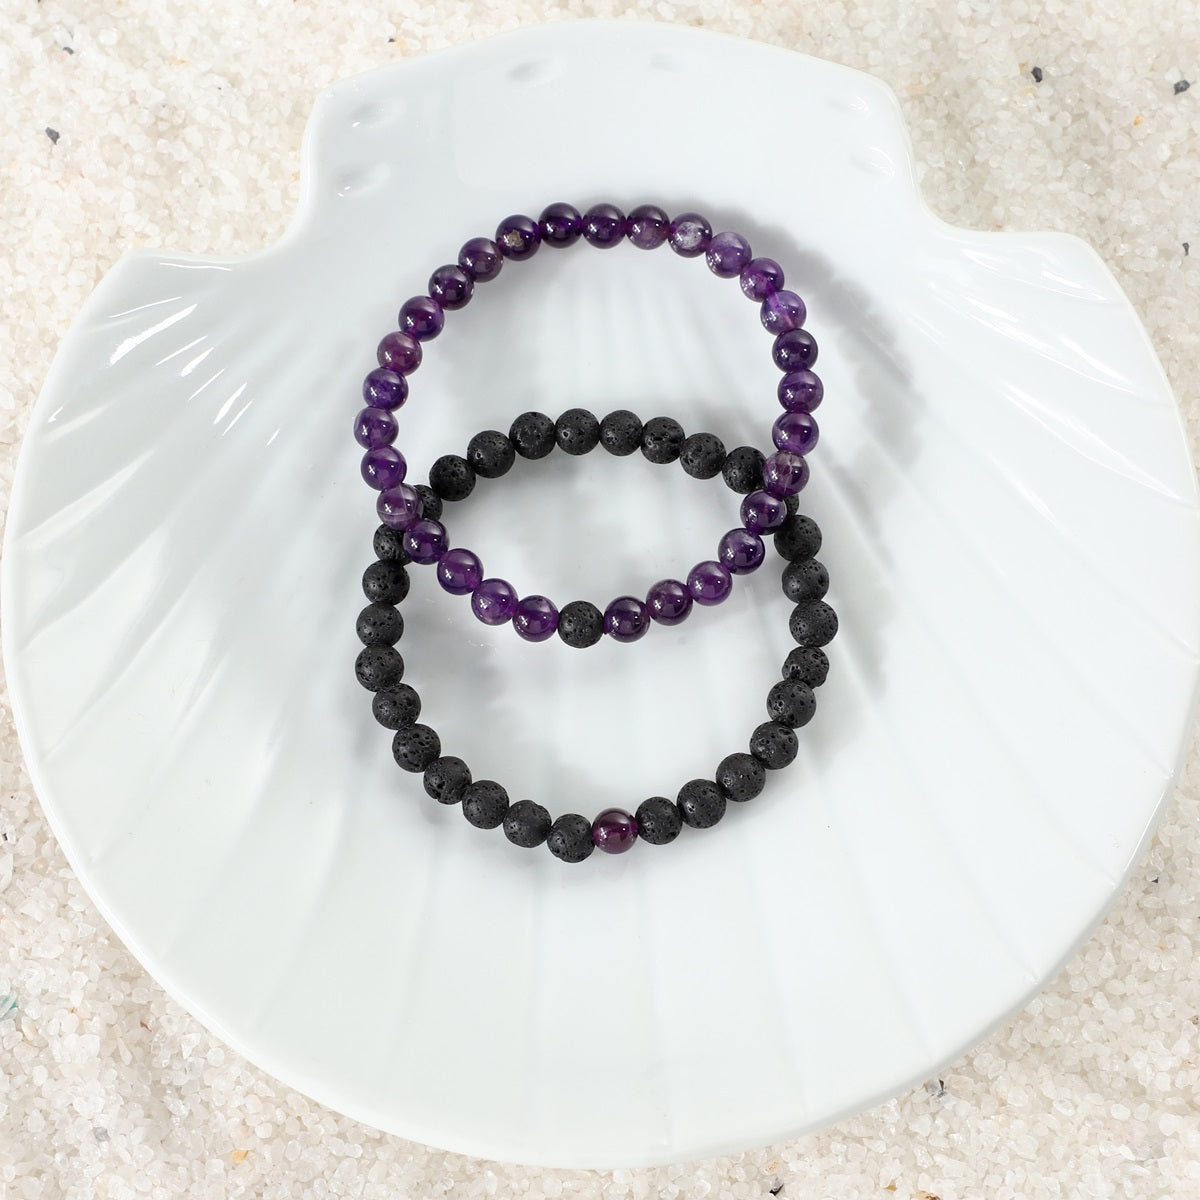 Chinese Amethyst and Black Pearl Bracelet - Garden Party Collection Vintage  Jewelry